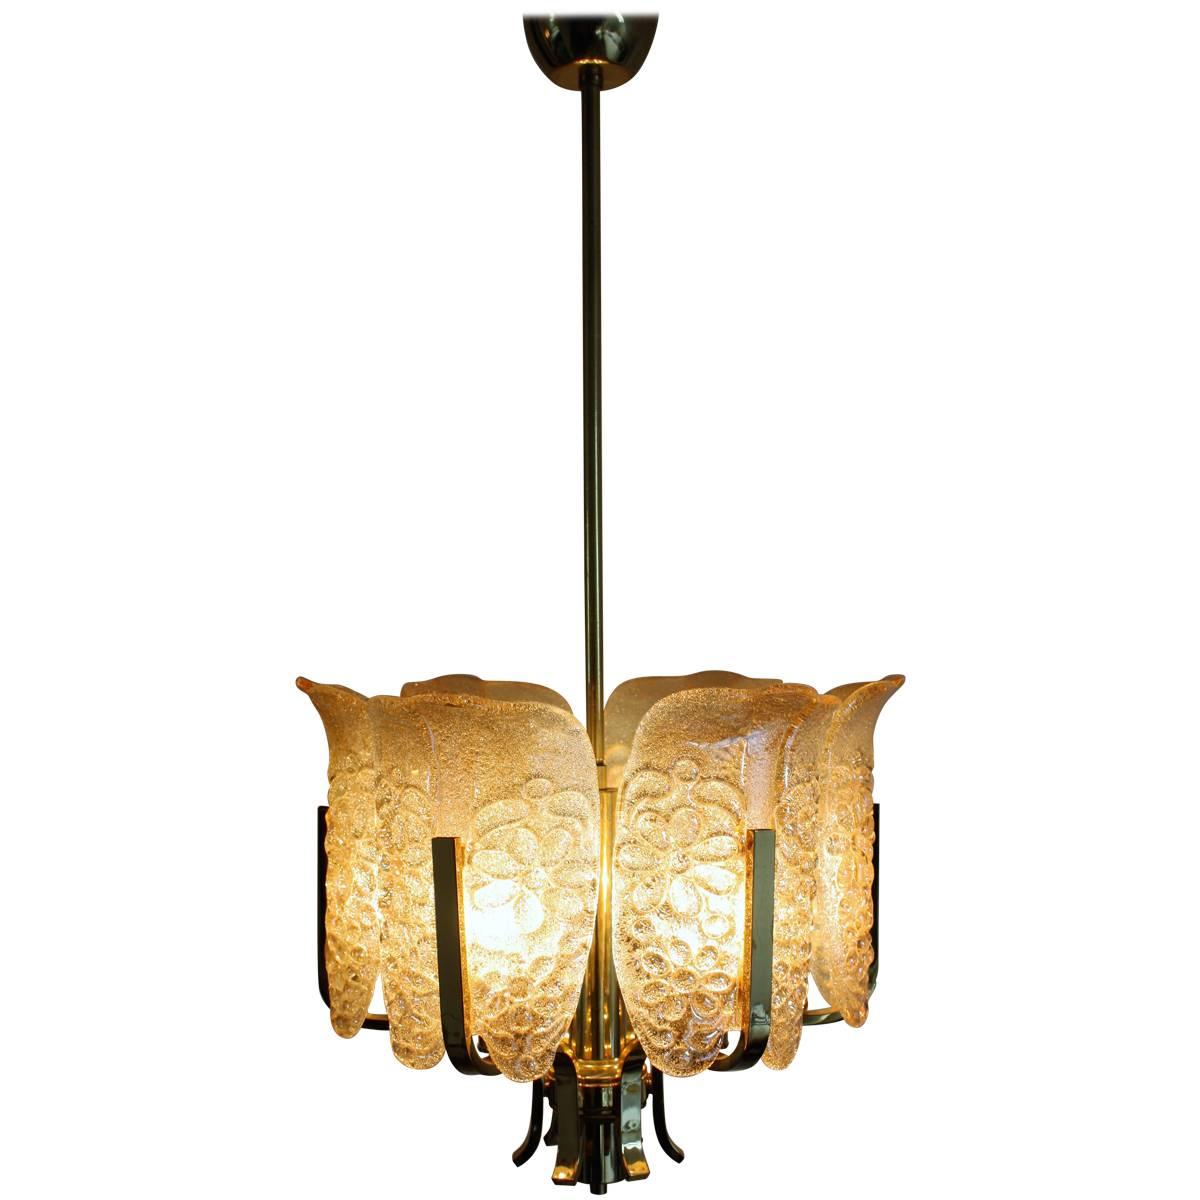 Amber Glass and Brass Chandelier by C. Fagerlund for Orrefors, circa 1960s